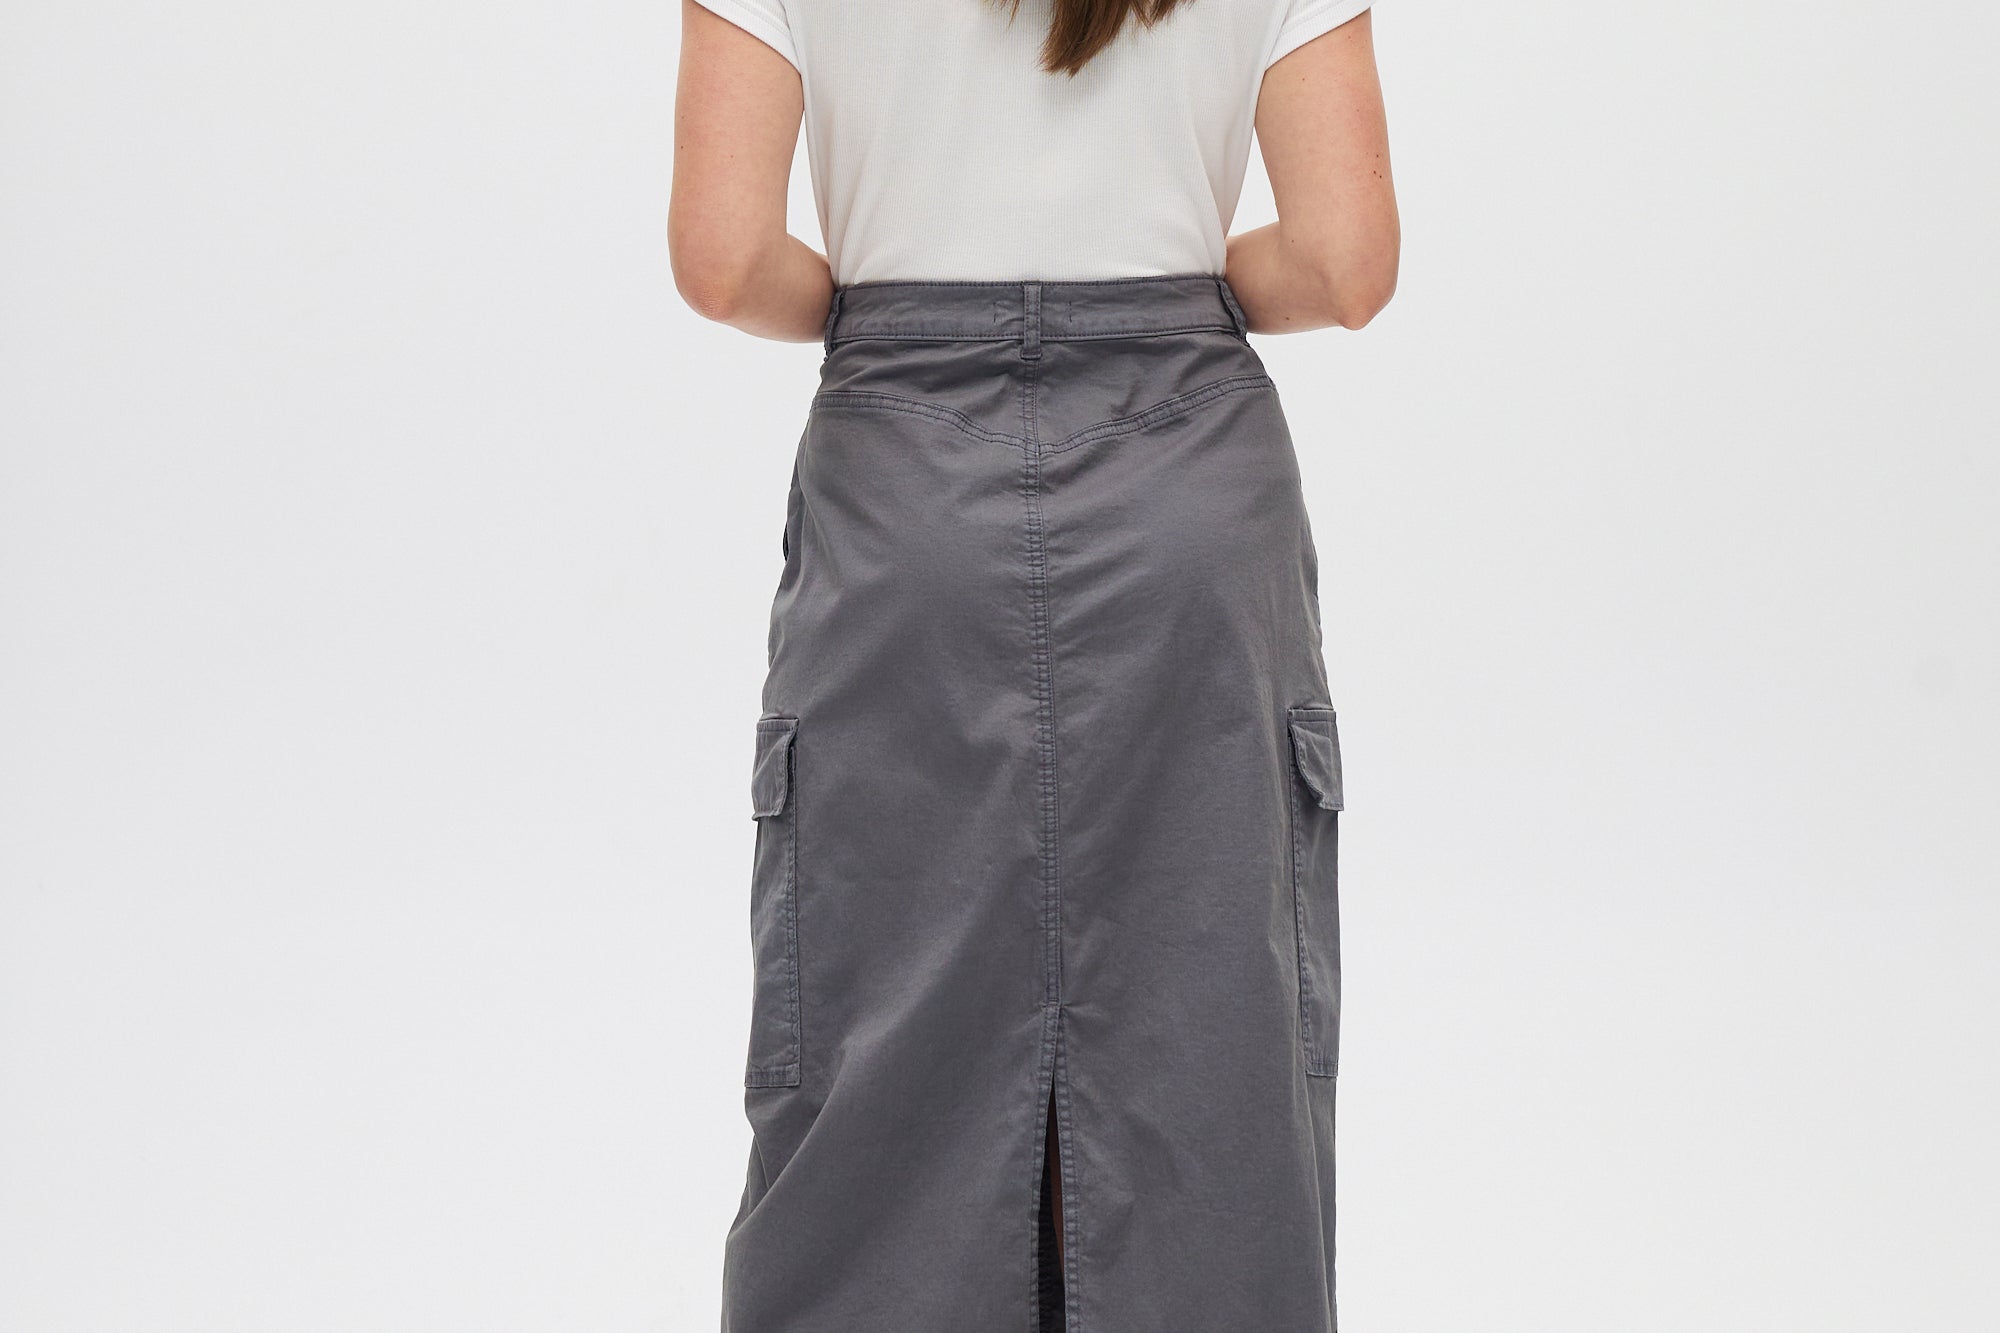 Charcoal Stretch Twill Skirt back